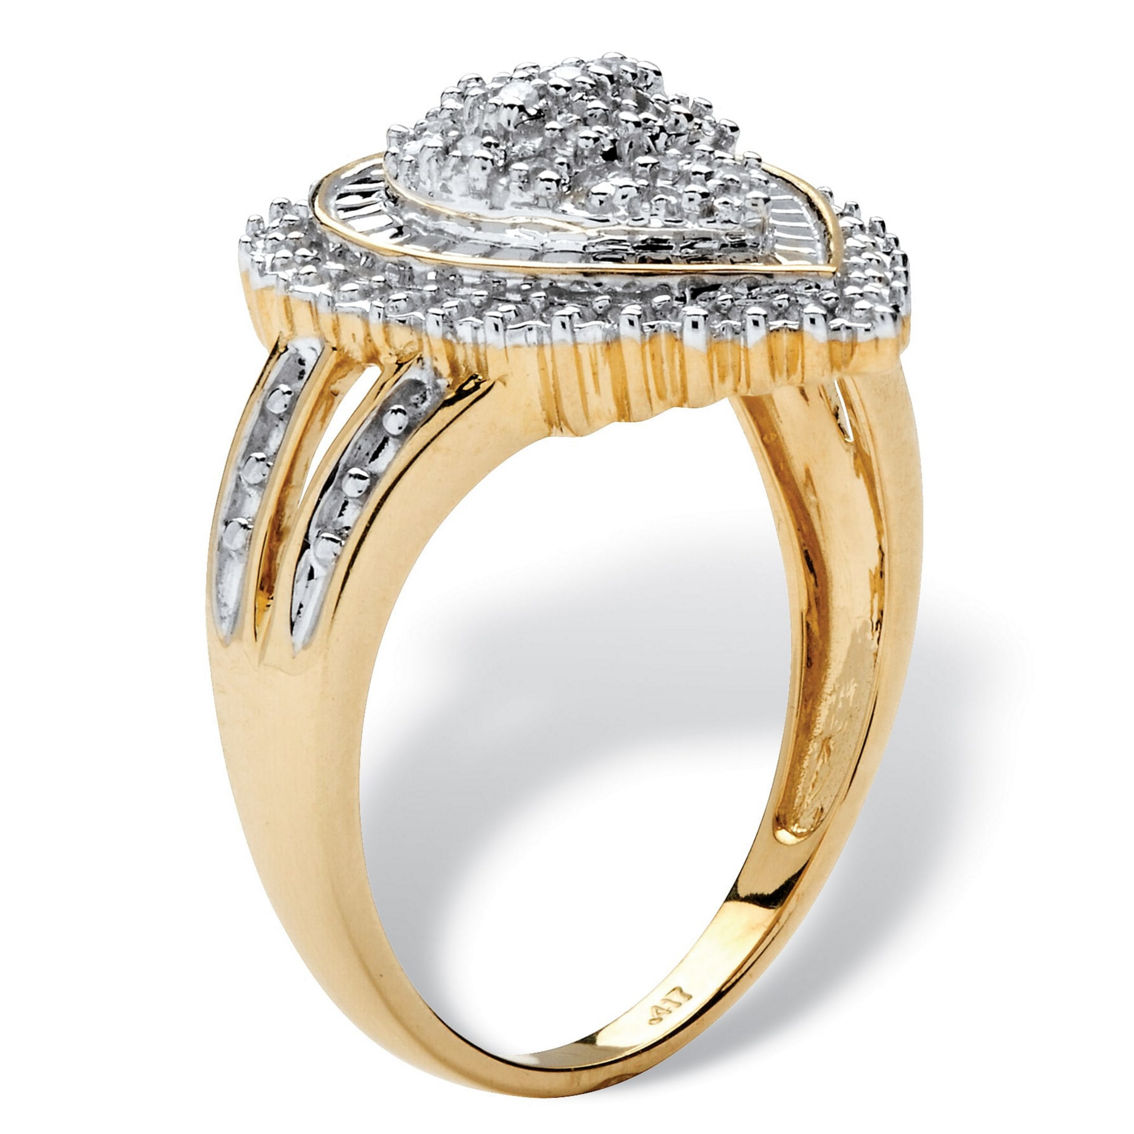 PalmBeach 1/10 TCW Round Diamond Pear Shaped Ballerina Setting Ring in 10k Gold - Image 2 of 5